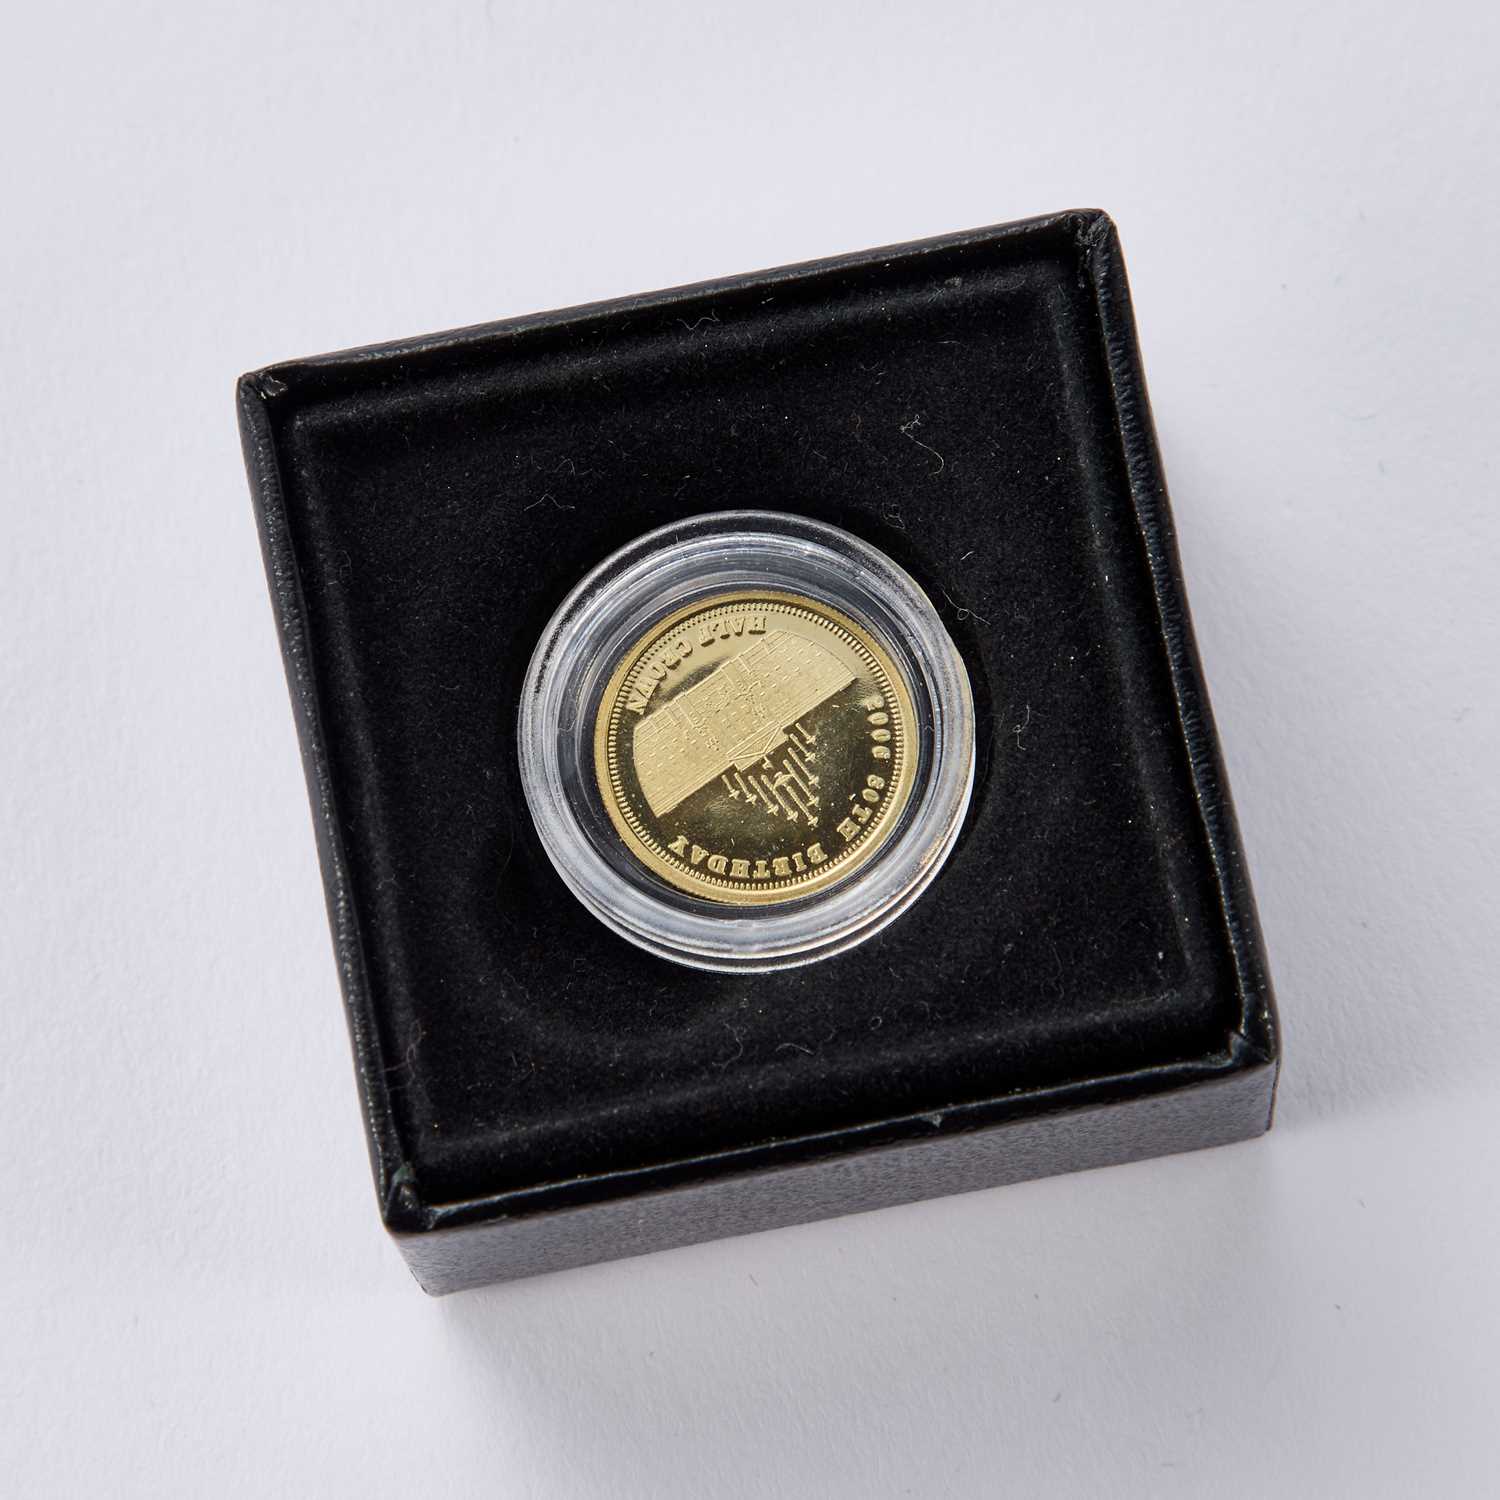 THE LONDON MINT OFFICE, THE ROYAL HOUSE OF WINDSOR GOLD COIN COLLECTION - Image 3 of 6